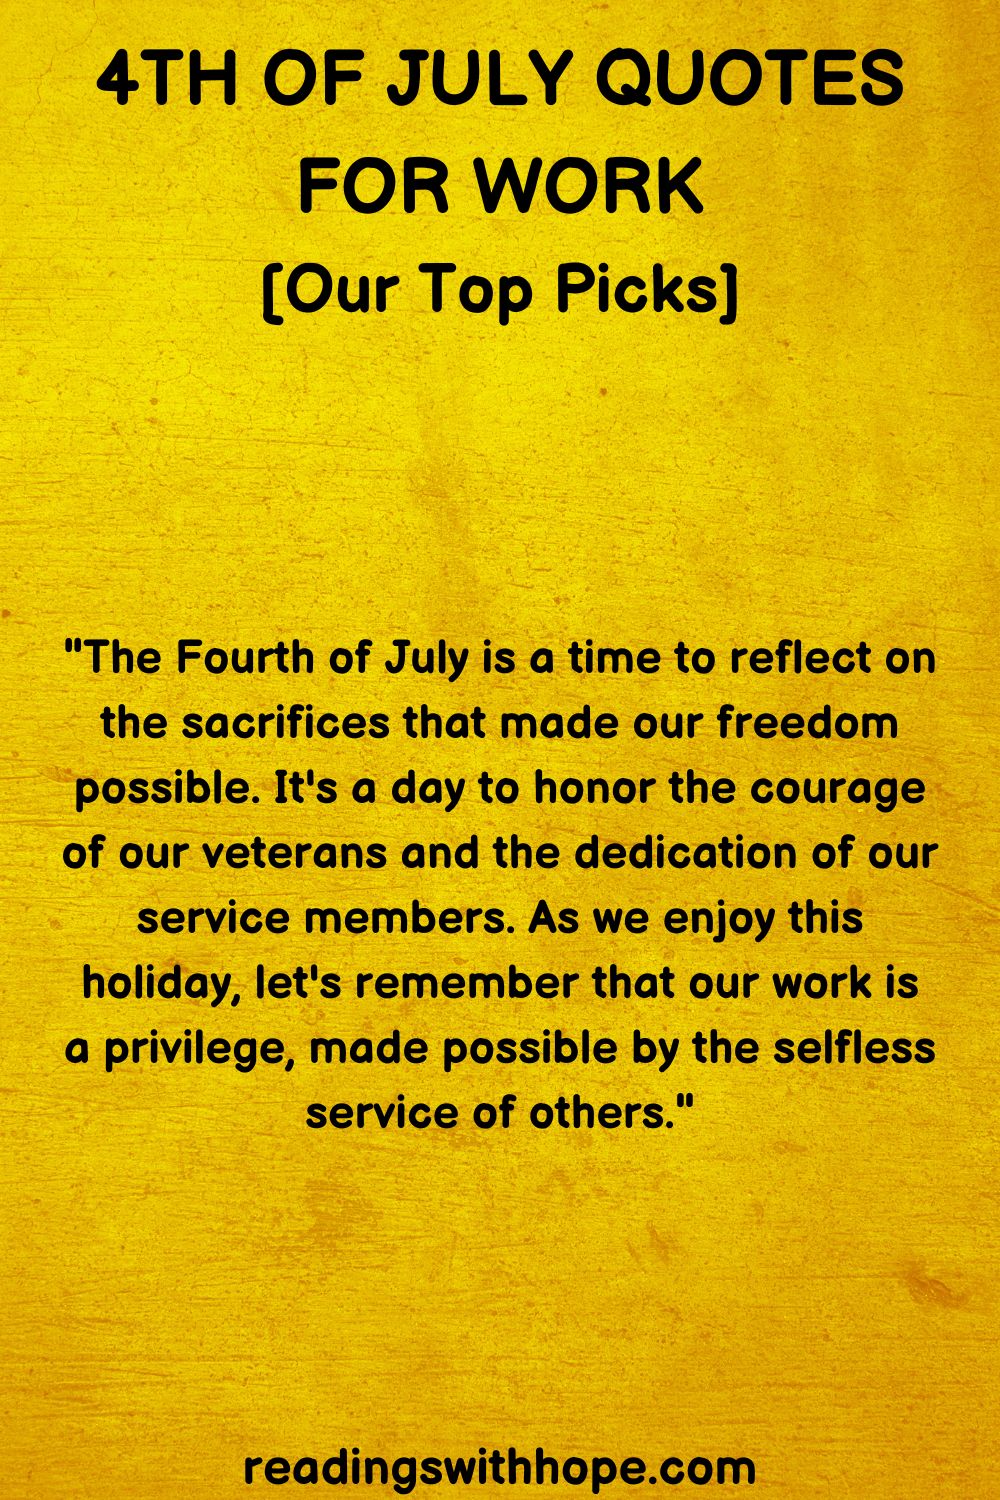 4th of July Quotes For Work